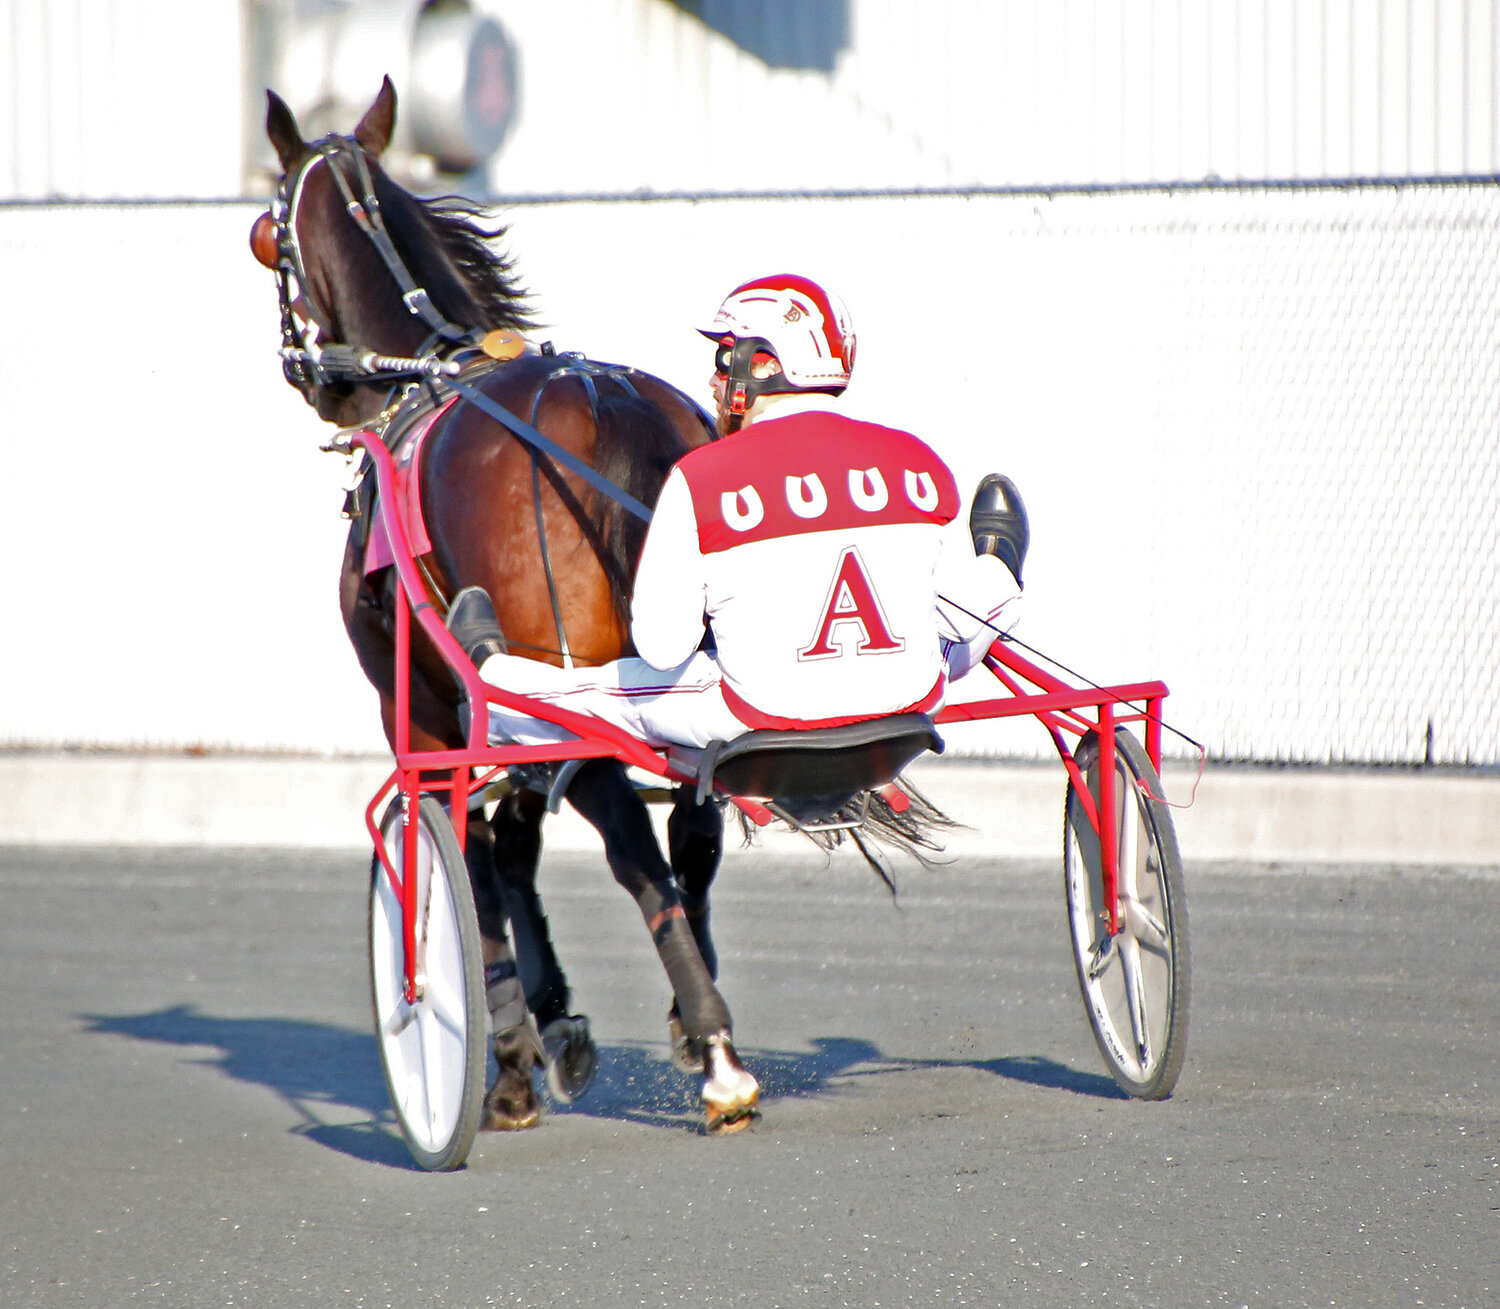 Allan Davis, the leading driver at Harrington Raceway, sports an  "A" on the back of his driver's suit.